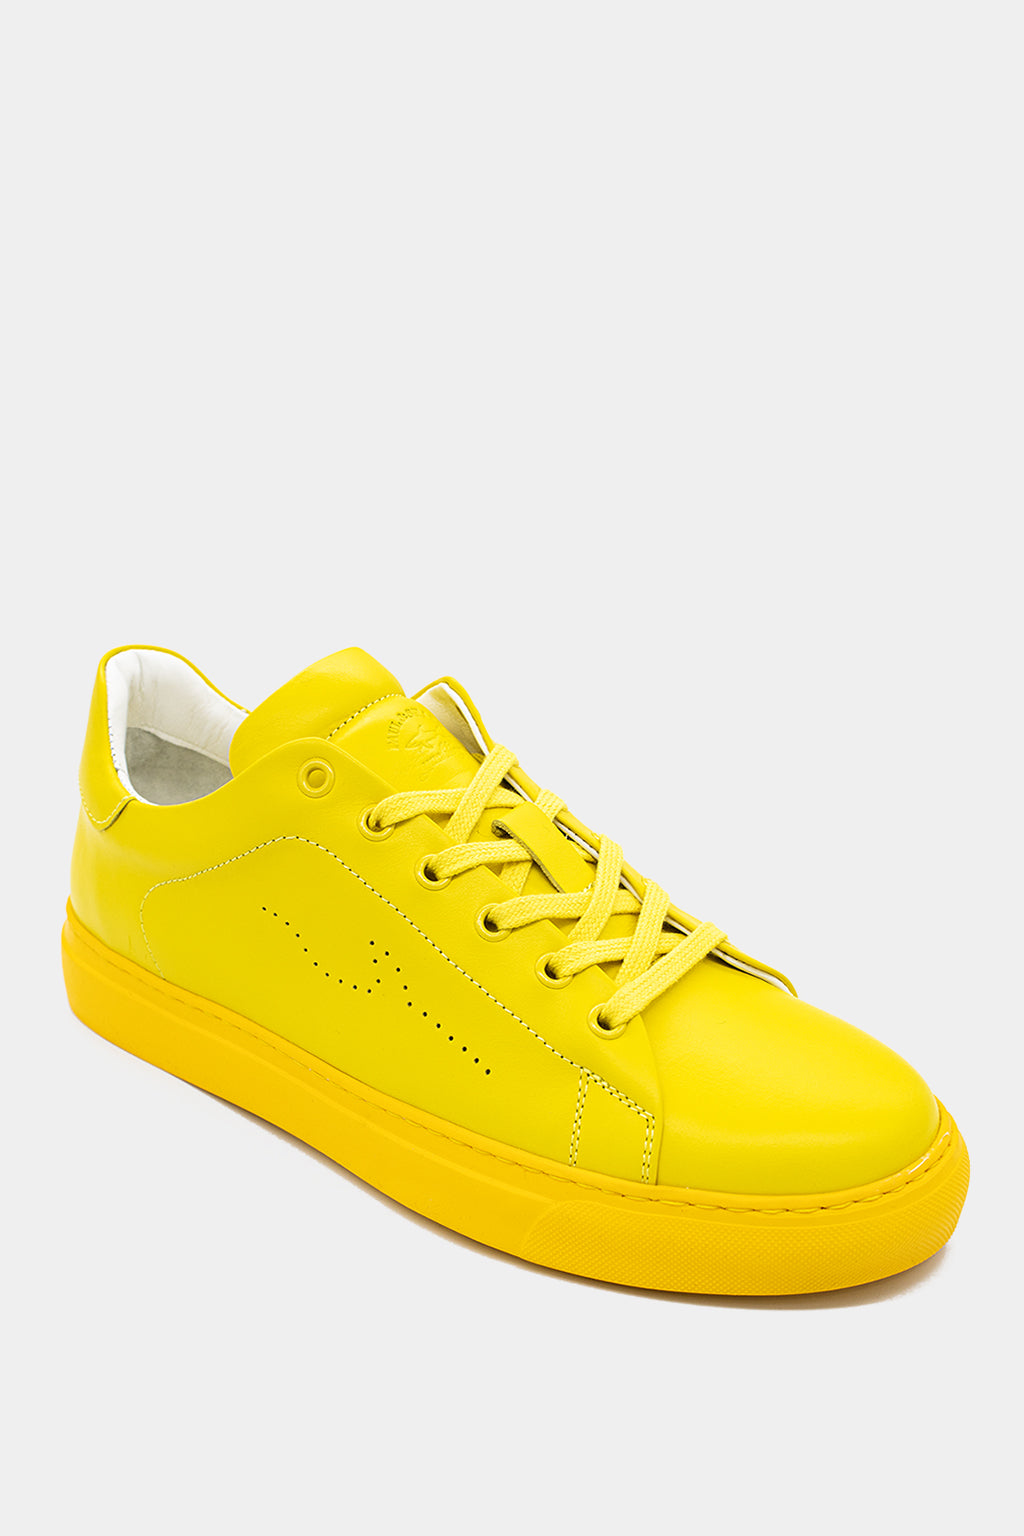 Paul & Shark Yachting - Leather Sneaker Shoes